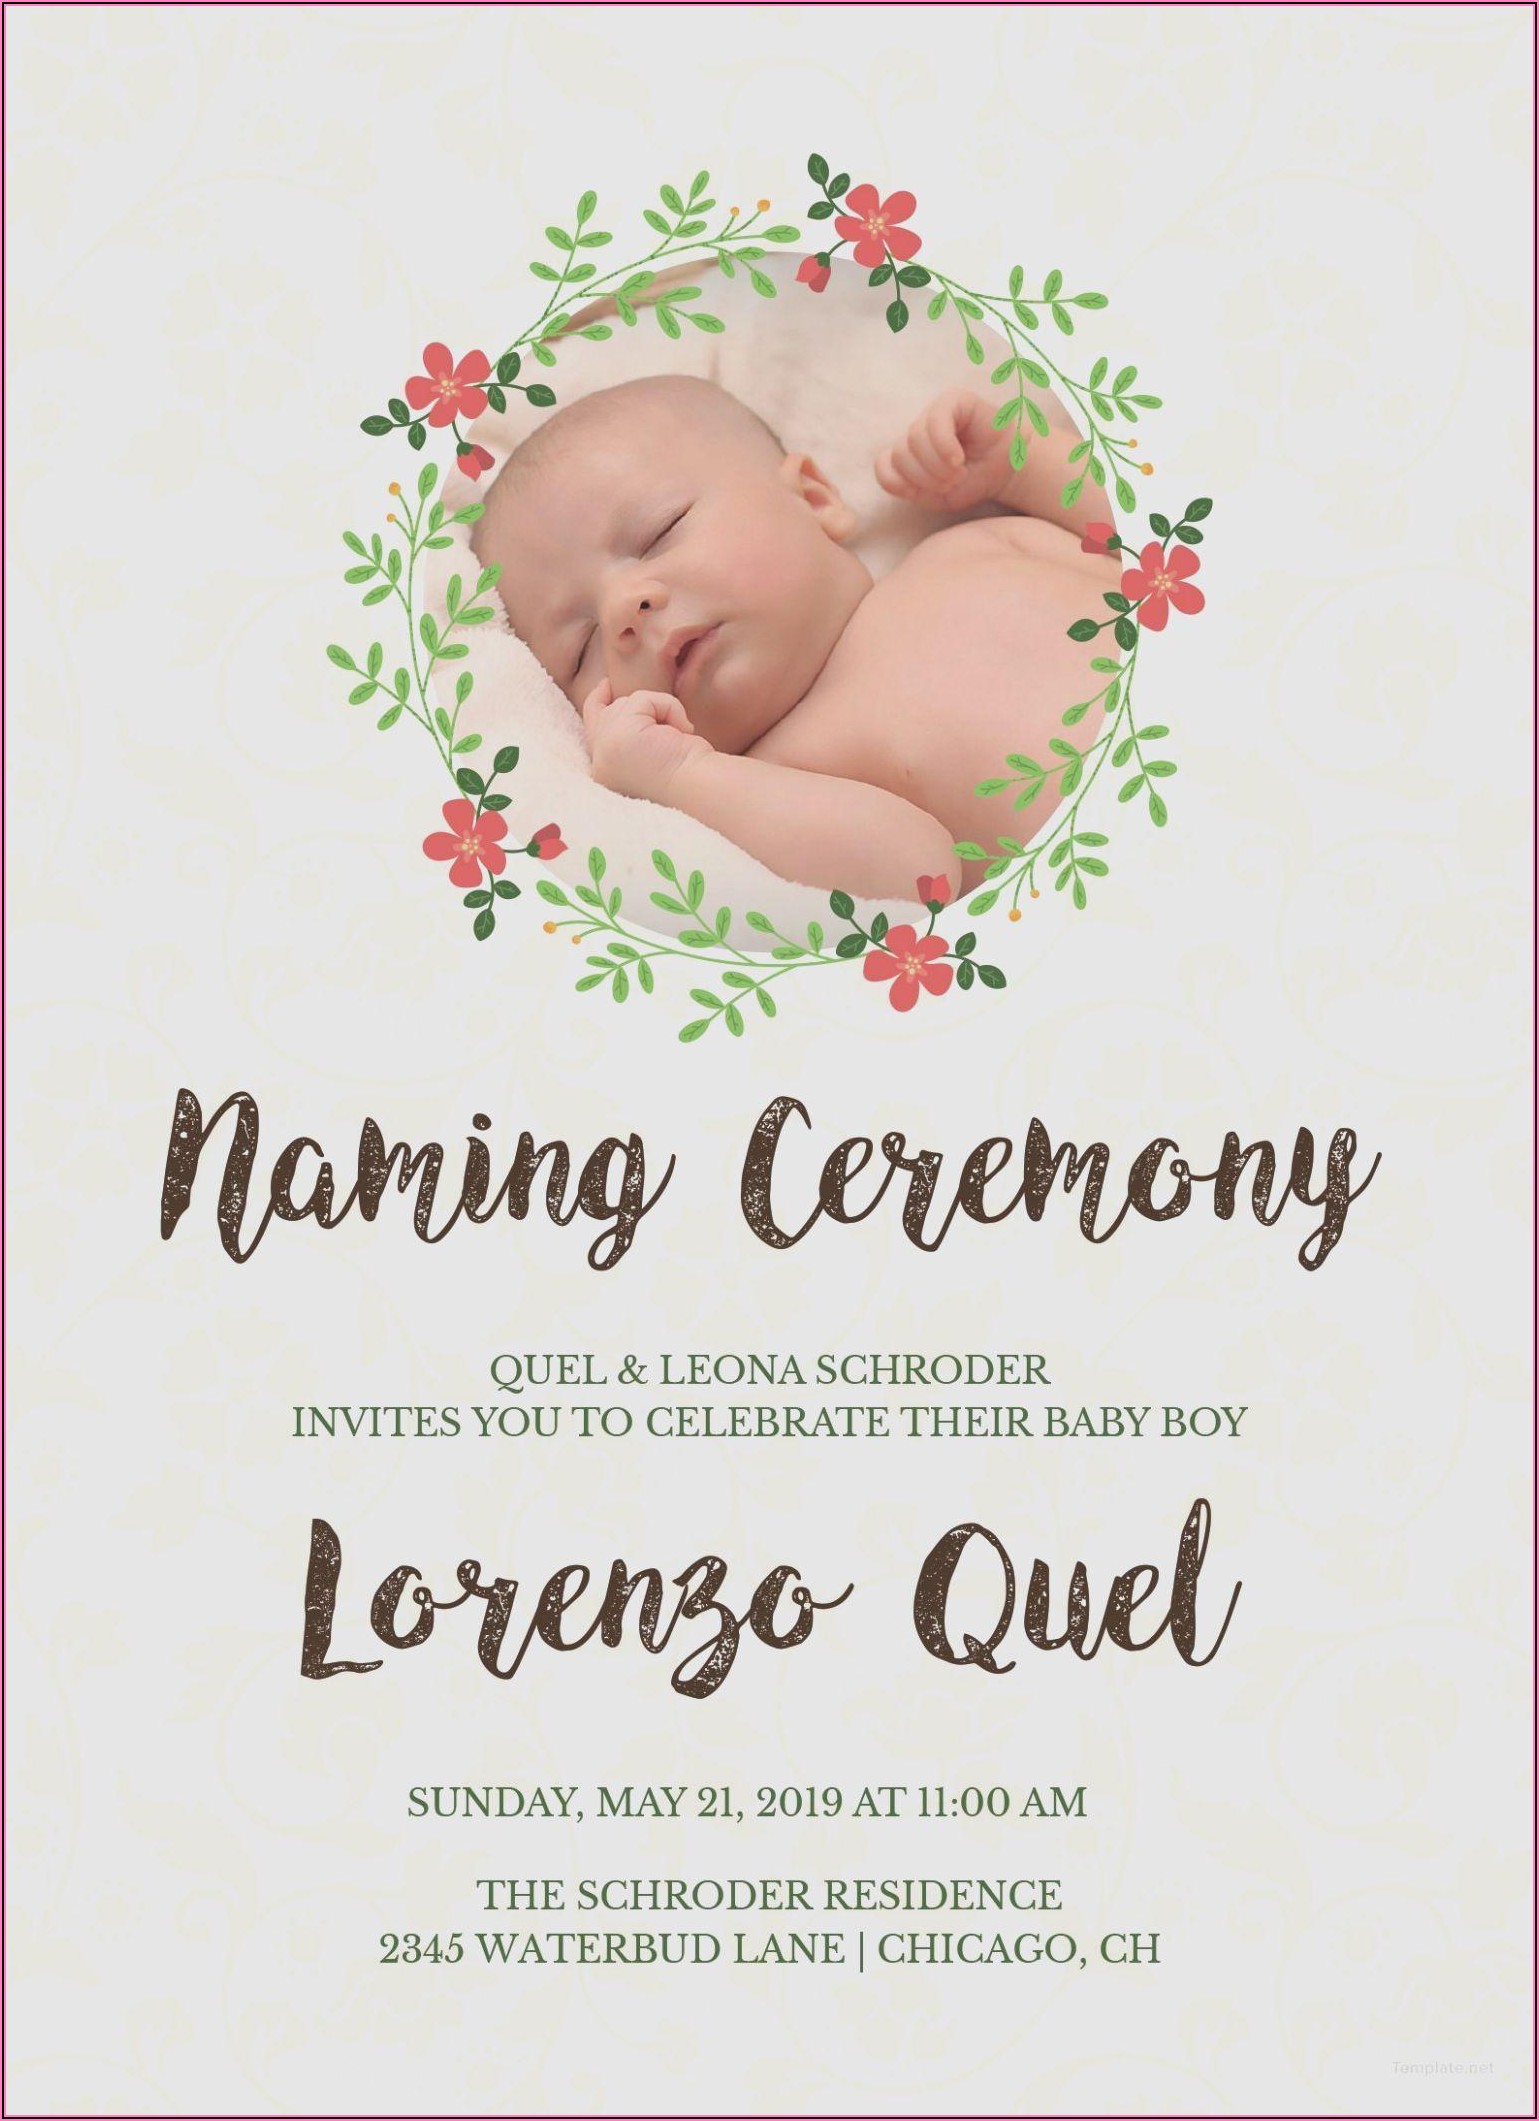 Naming Ceremony Invitation Card For Baby Boy Quotes